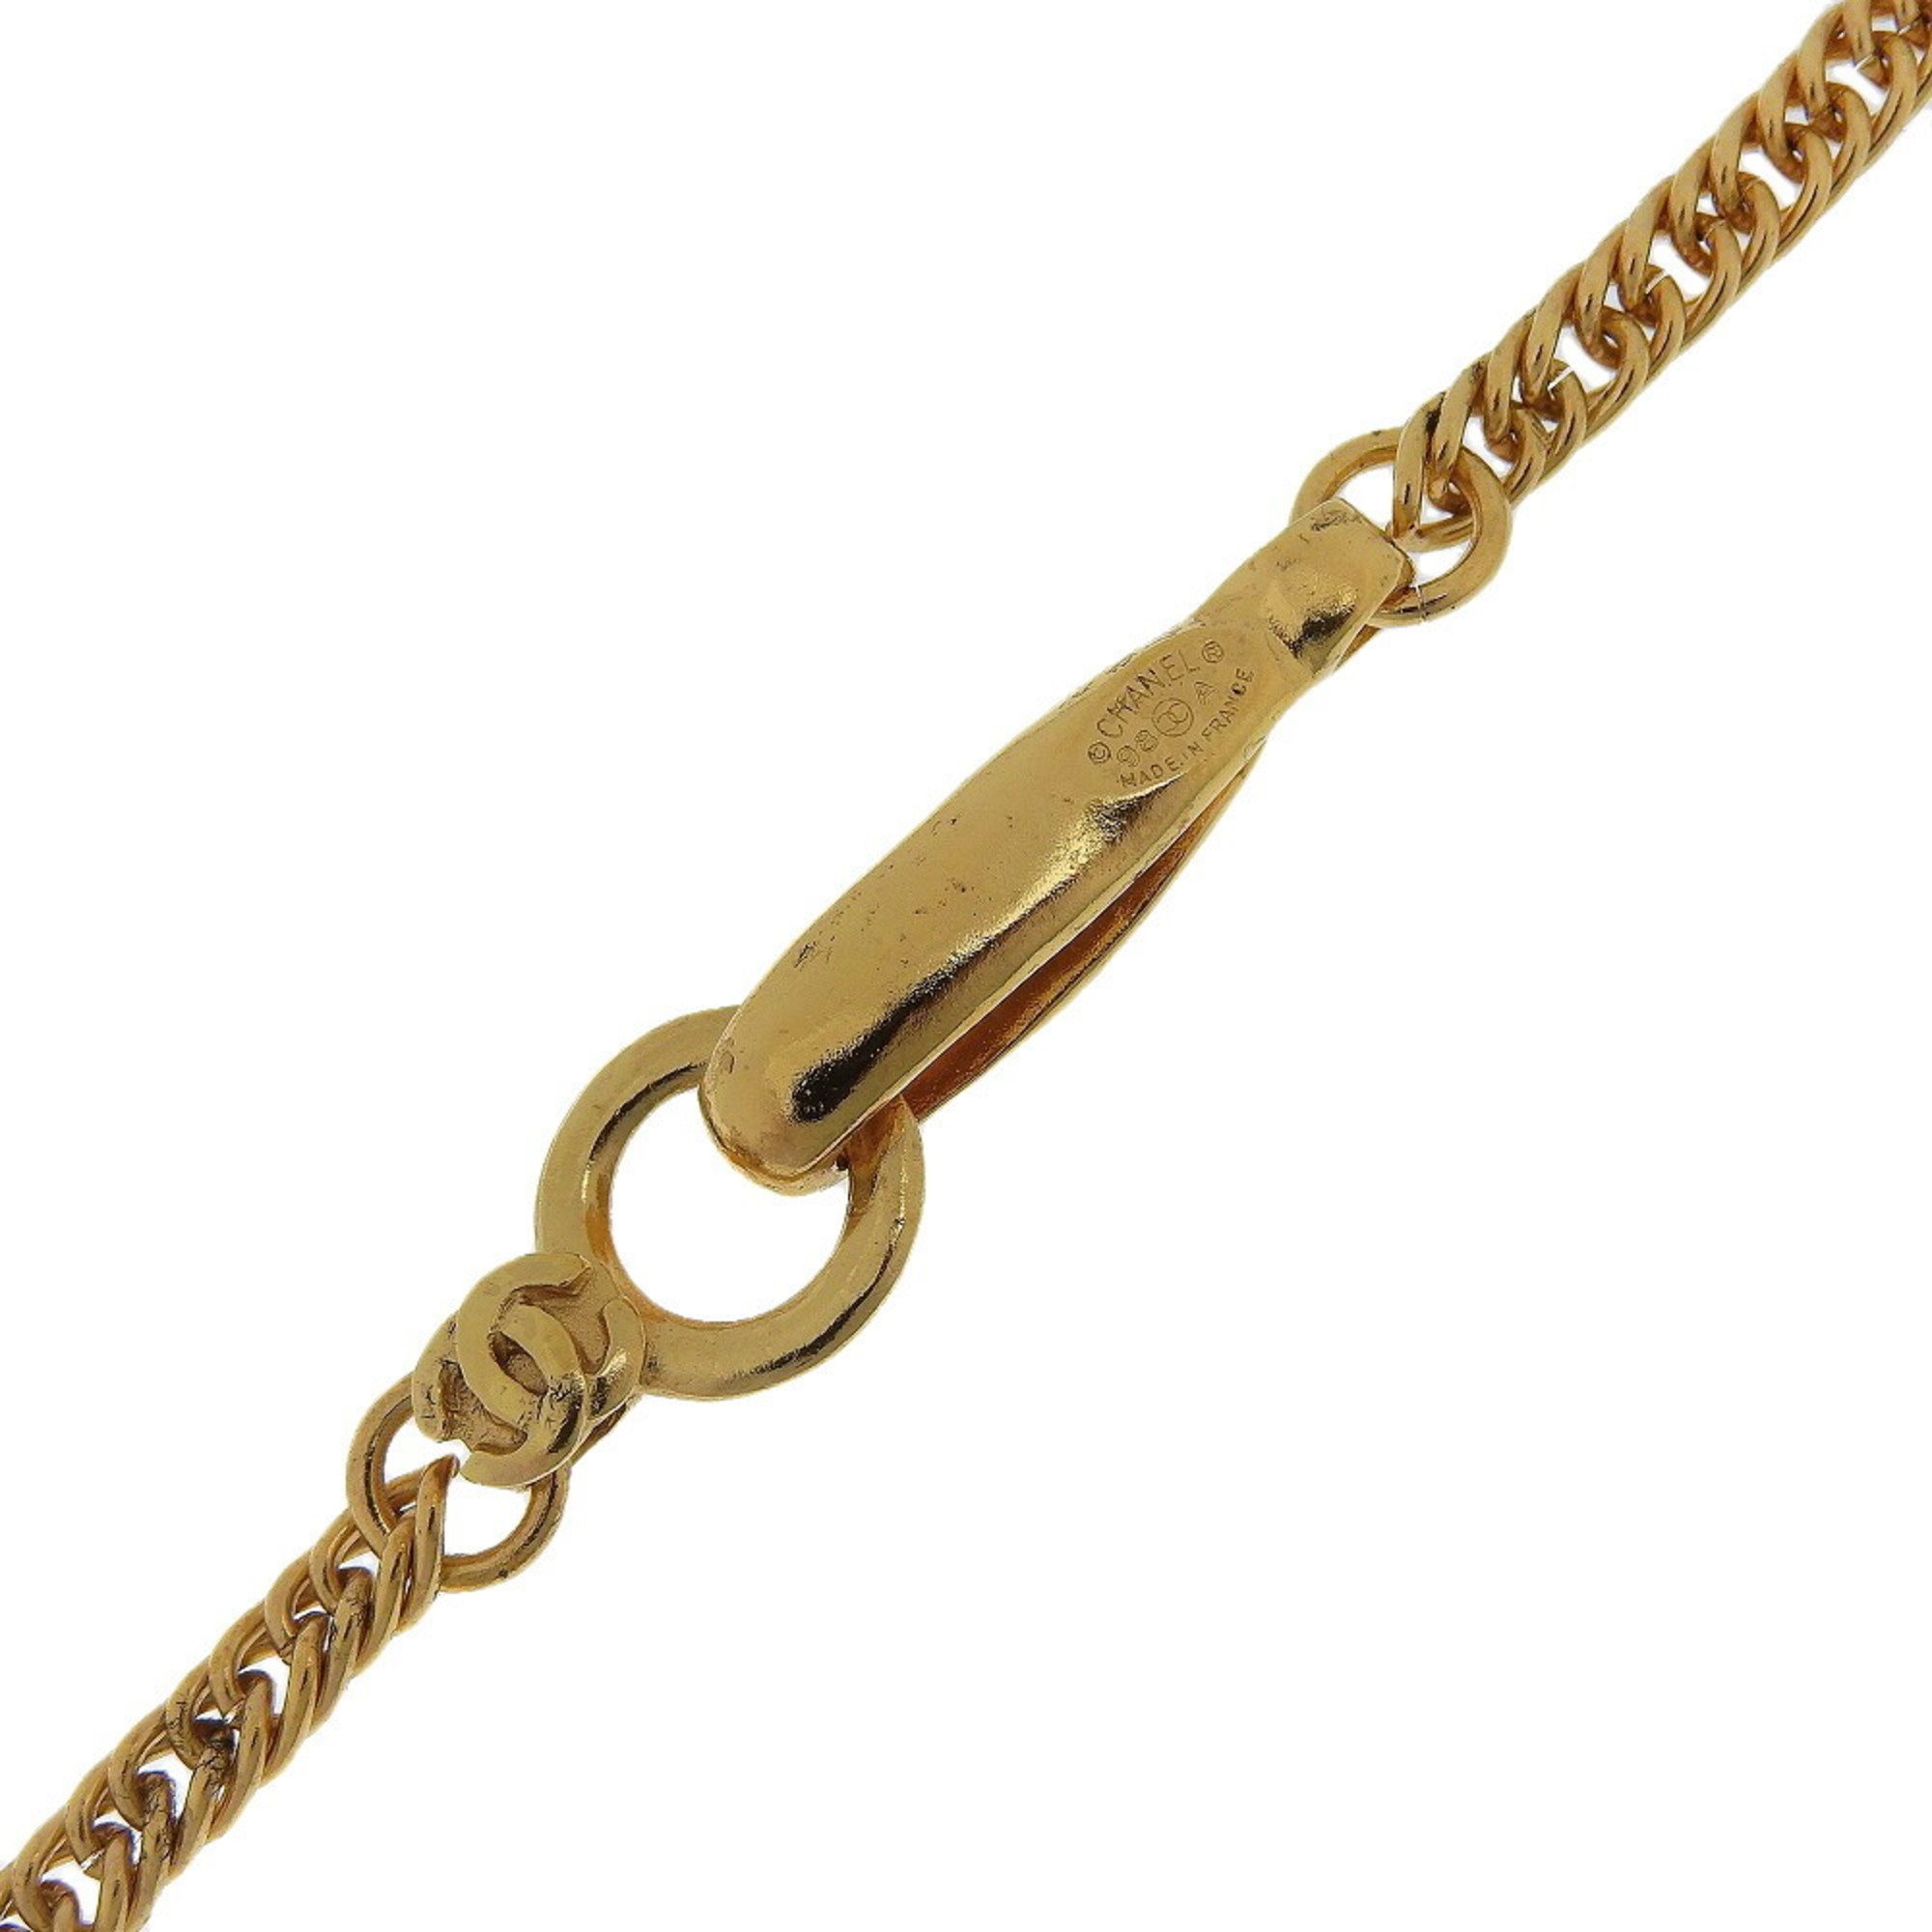 CHANEL COCO Mark Necklace Pendant Gold Plated Made in France 1998 98A Approx. 52.7g Women's